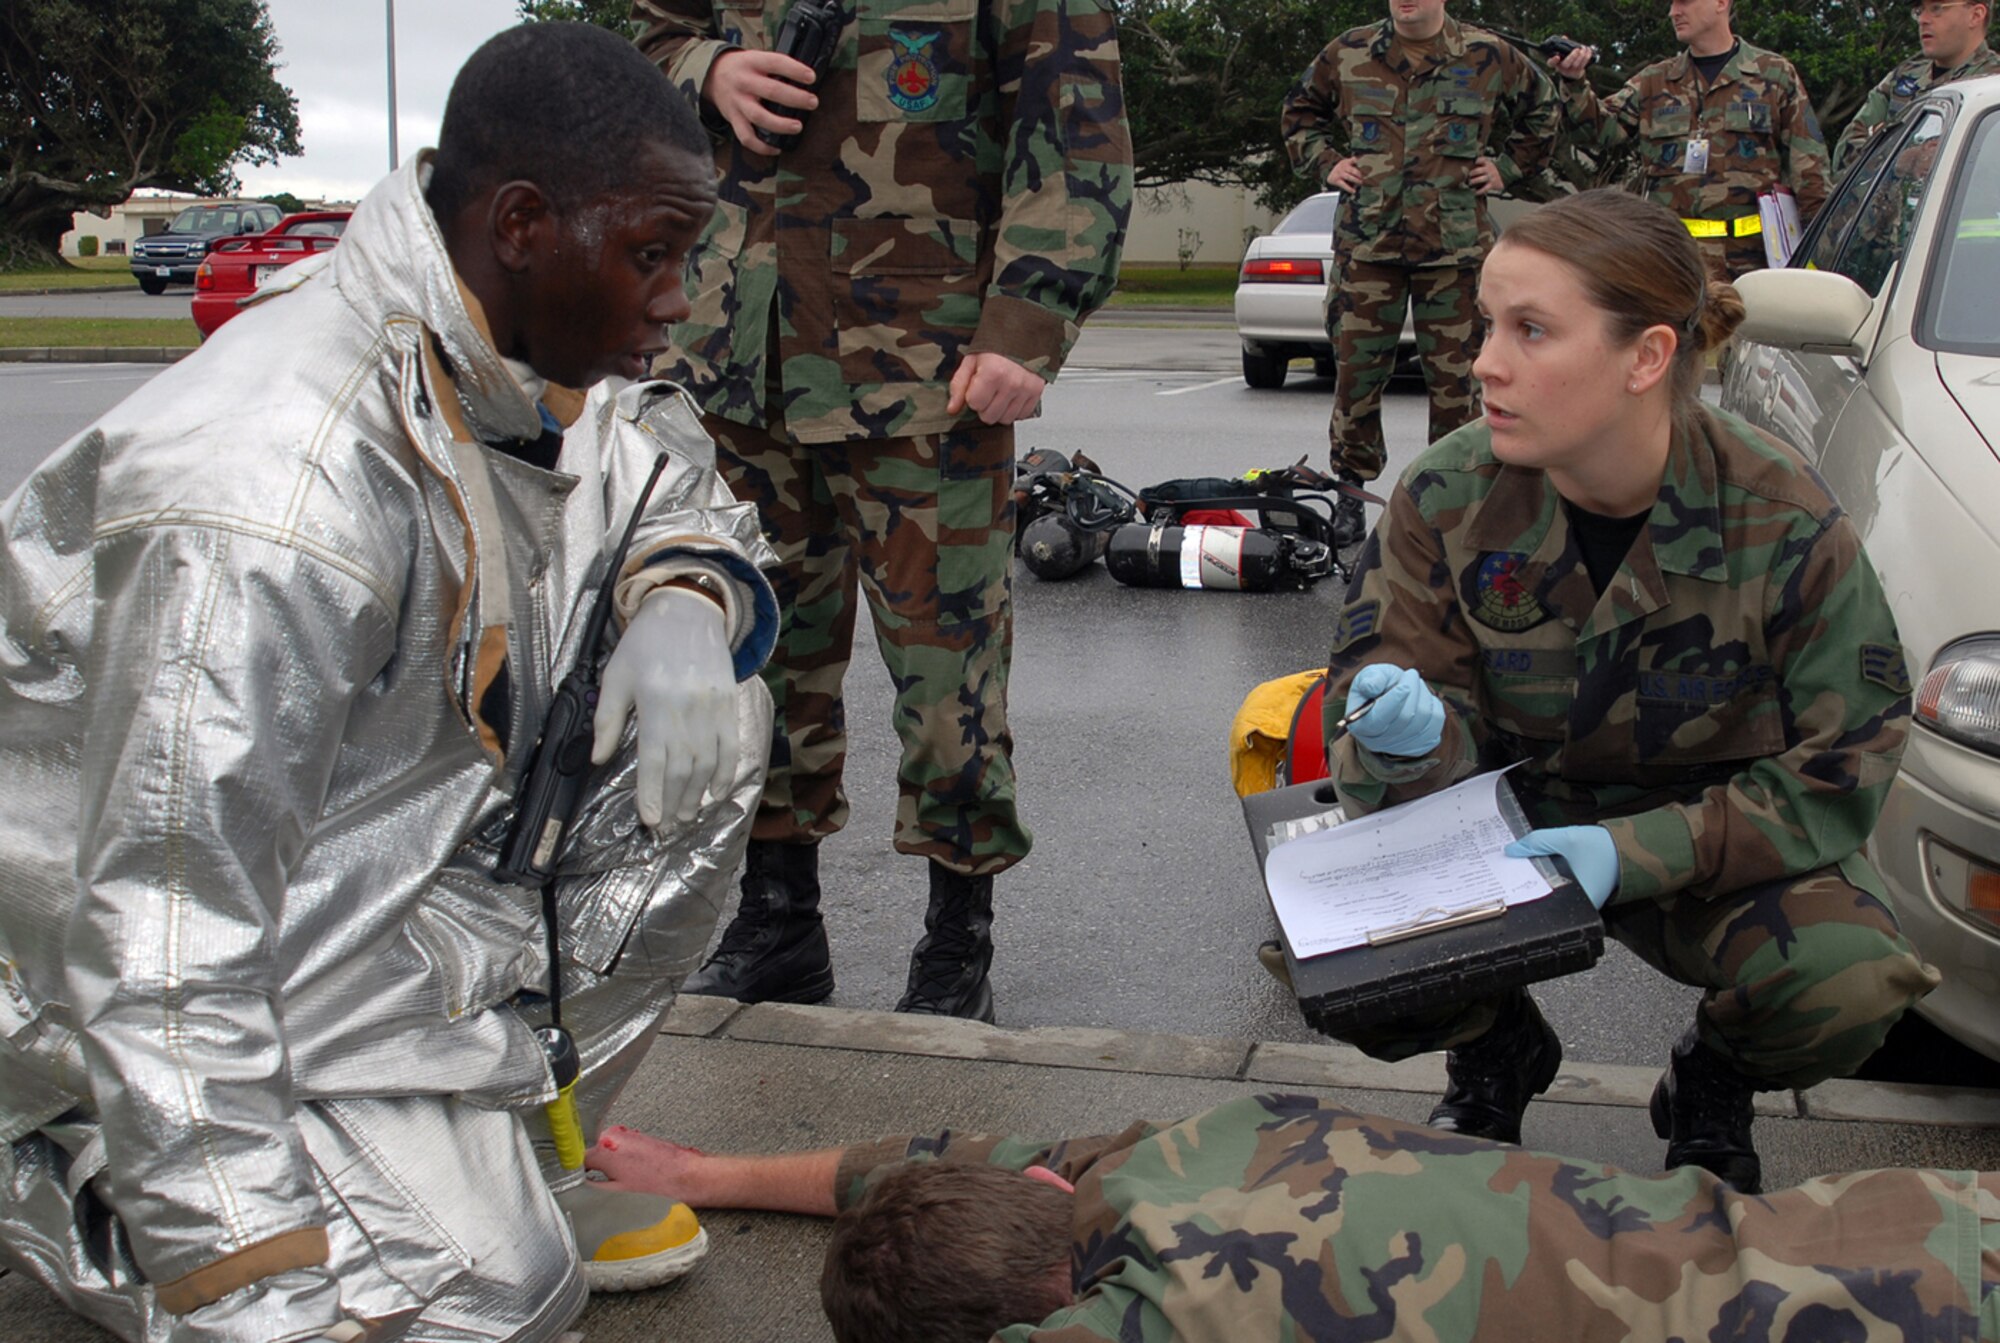 Senior Airman Ashley Sard, 18th Medical Operations Squadron, gets victim information from a firefighter following a simulated explosion at the Marshall Dining Facility during Local Operational Readiness Exercise Beverly High 08-3 at Kadena Air Base, Japan, Jan. 7, 2007. The 18th Wing exercise from Jan. 7 to 11 tests the wing's ability to respond in contingency situations.   (U.S. Air Force photo/Tech. Sgt. Dave DeRemer)